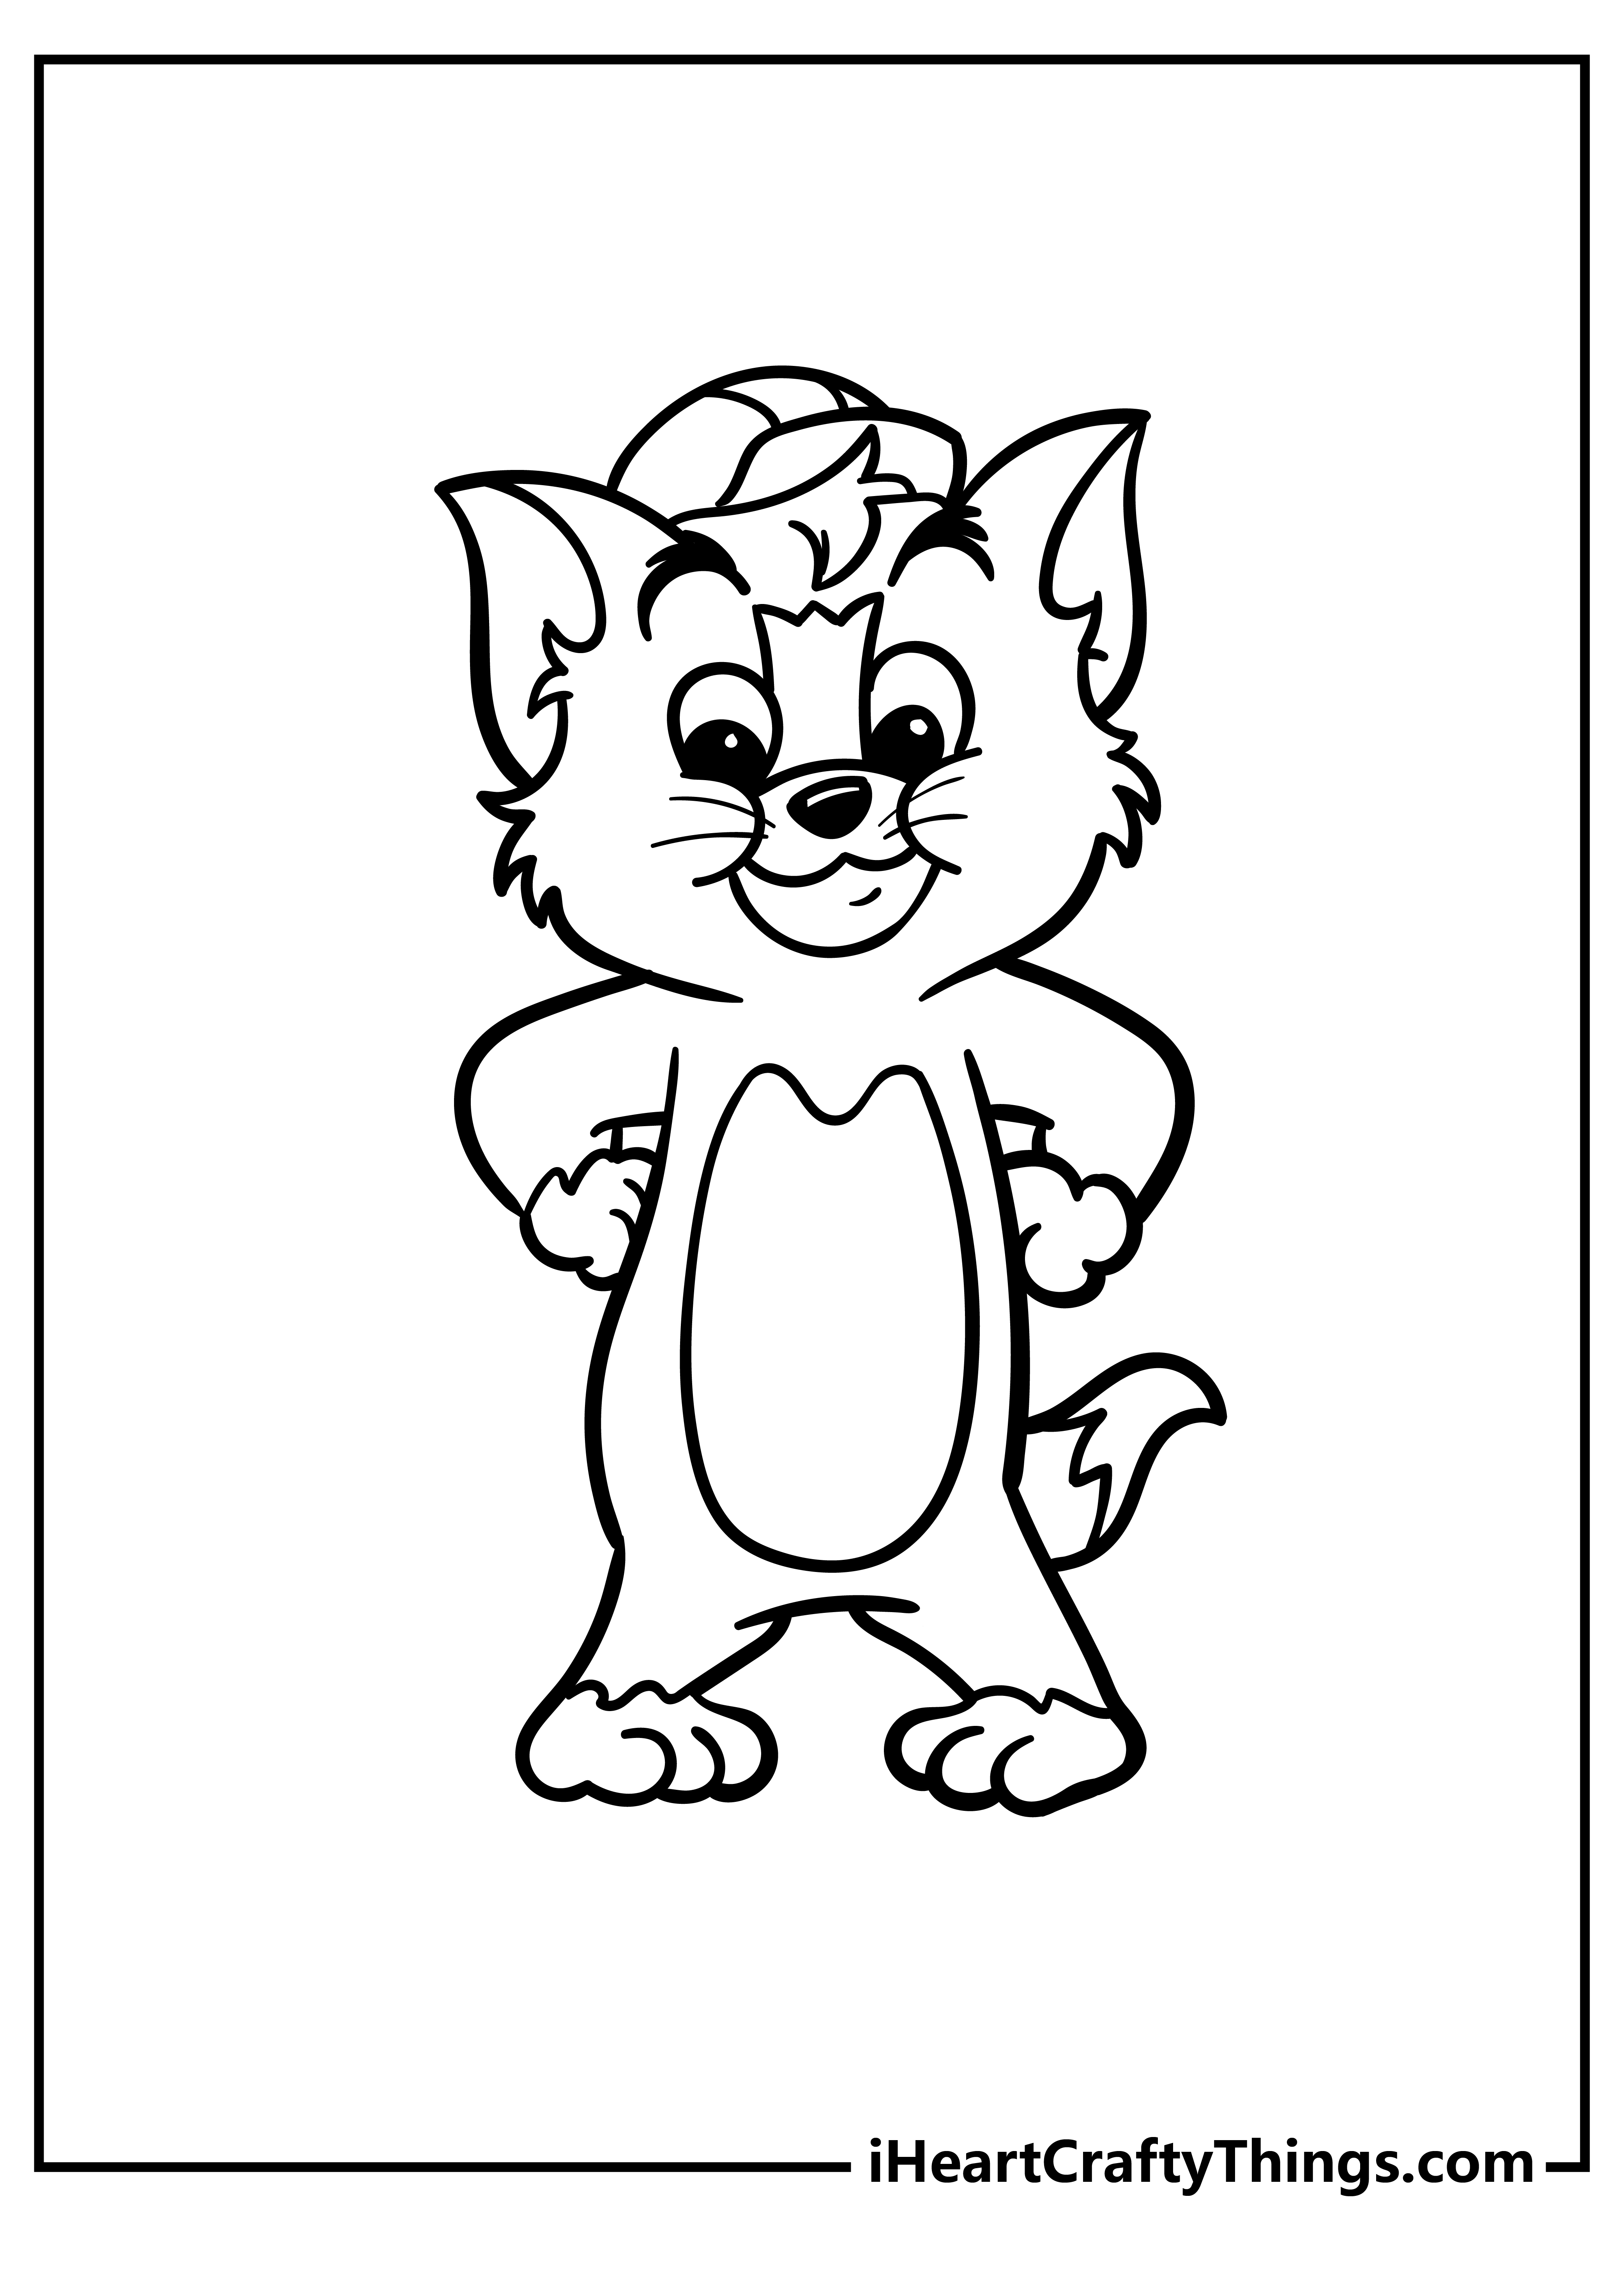 Tom and Jerry Coloring Pages for preschoolers free printable